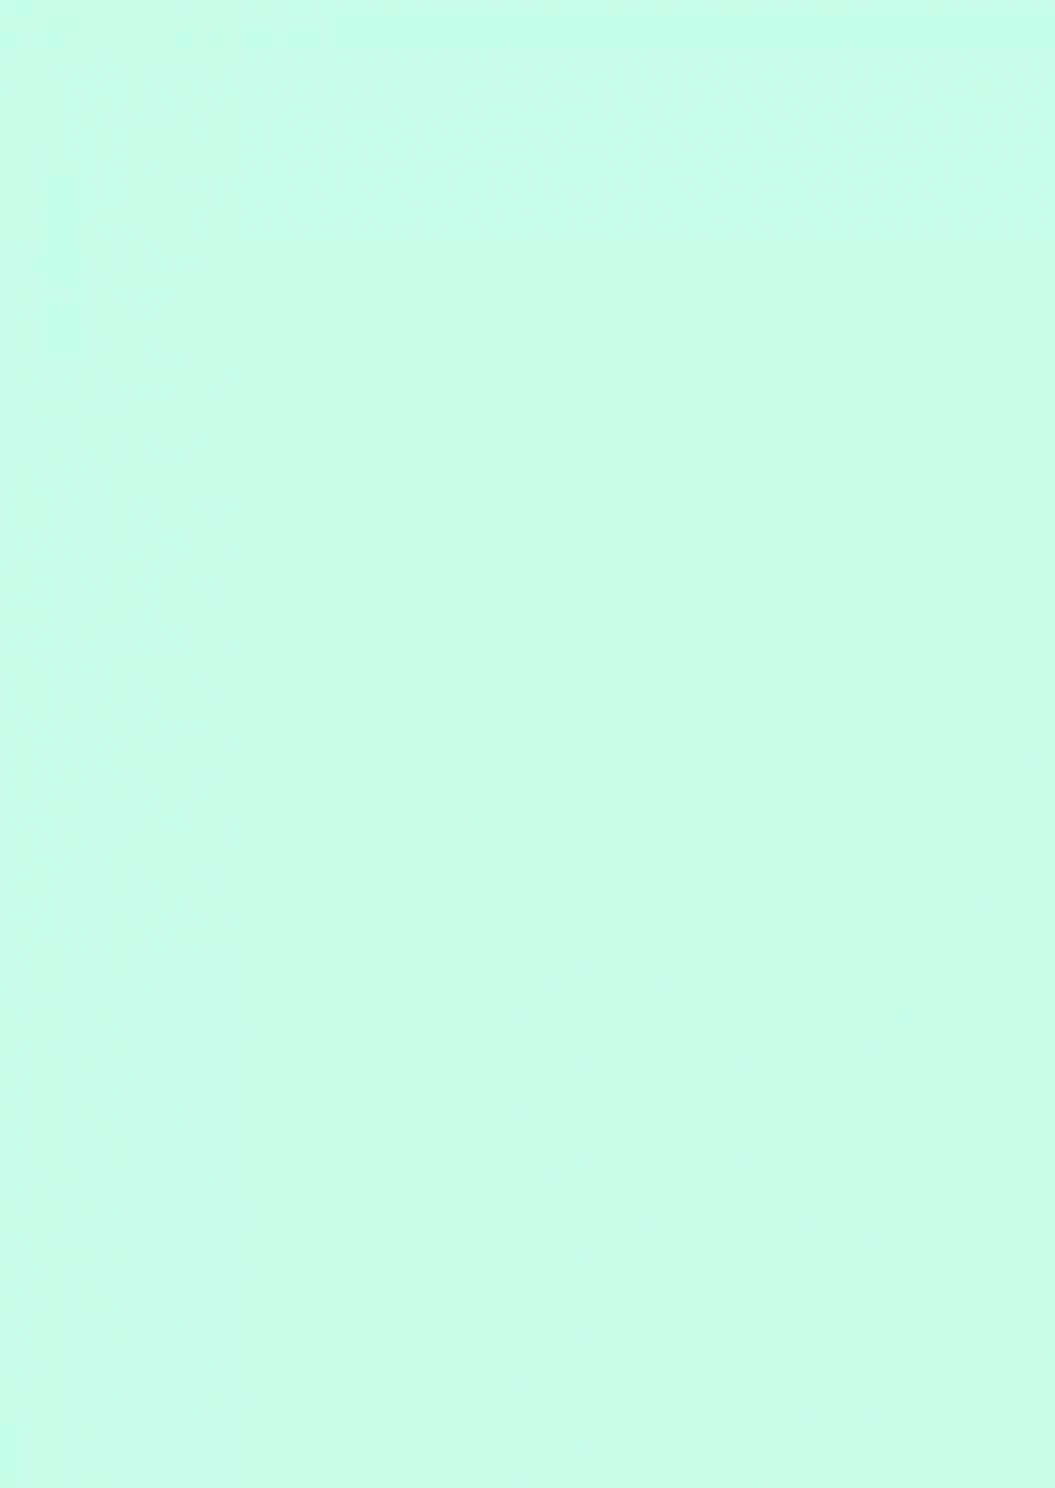 A Green Background With A White Airplane Flying Over It